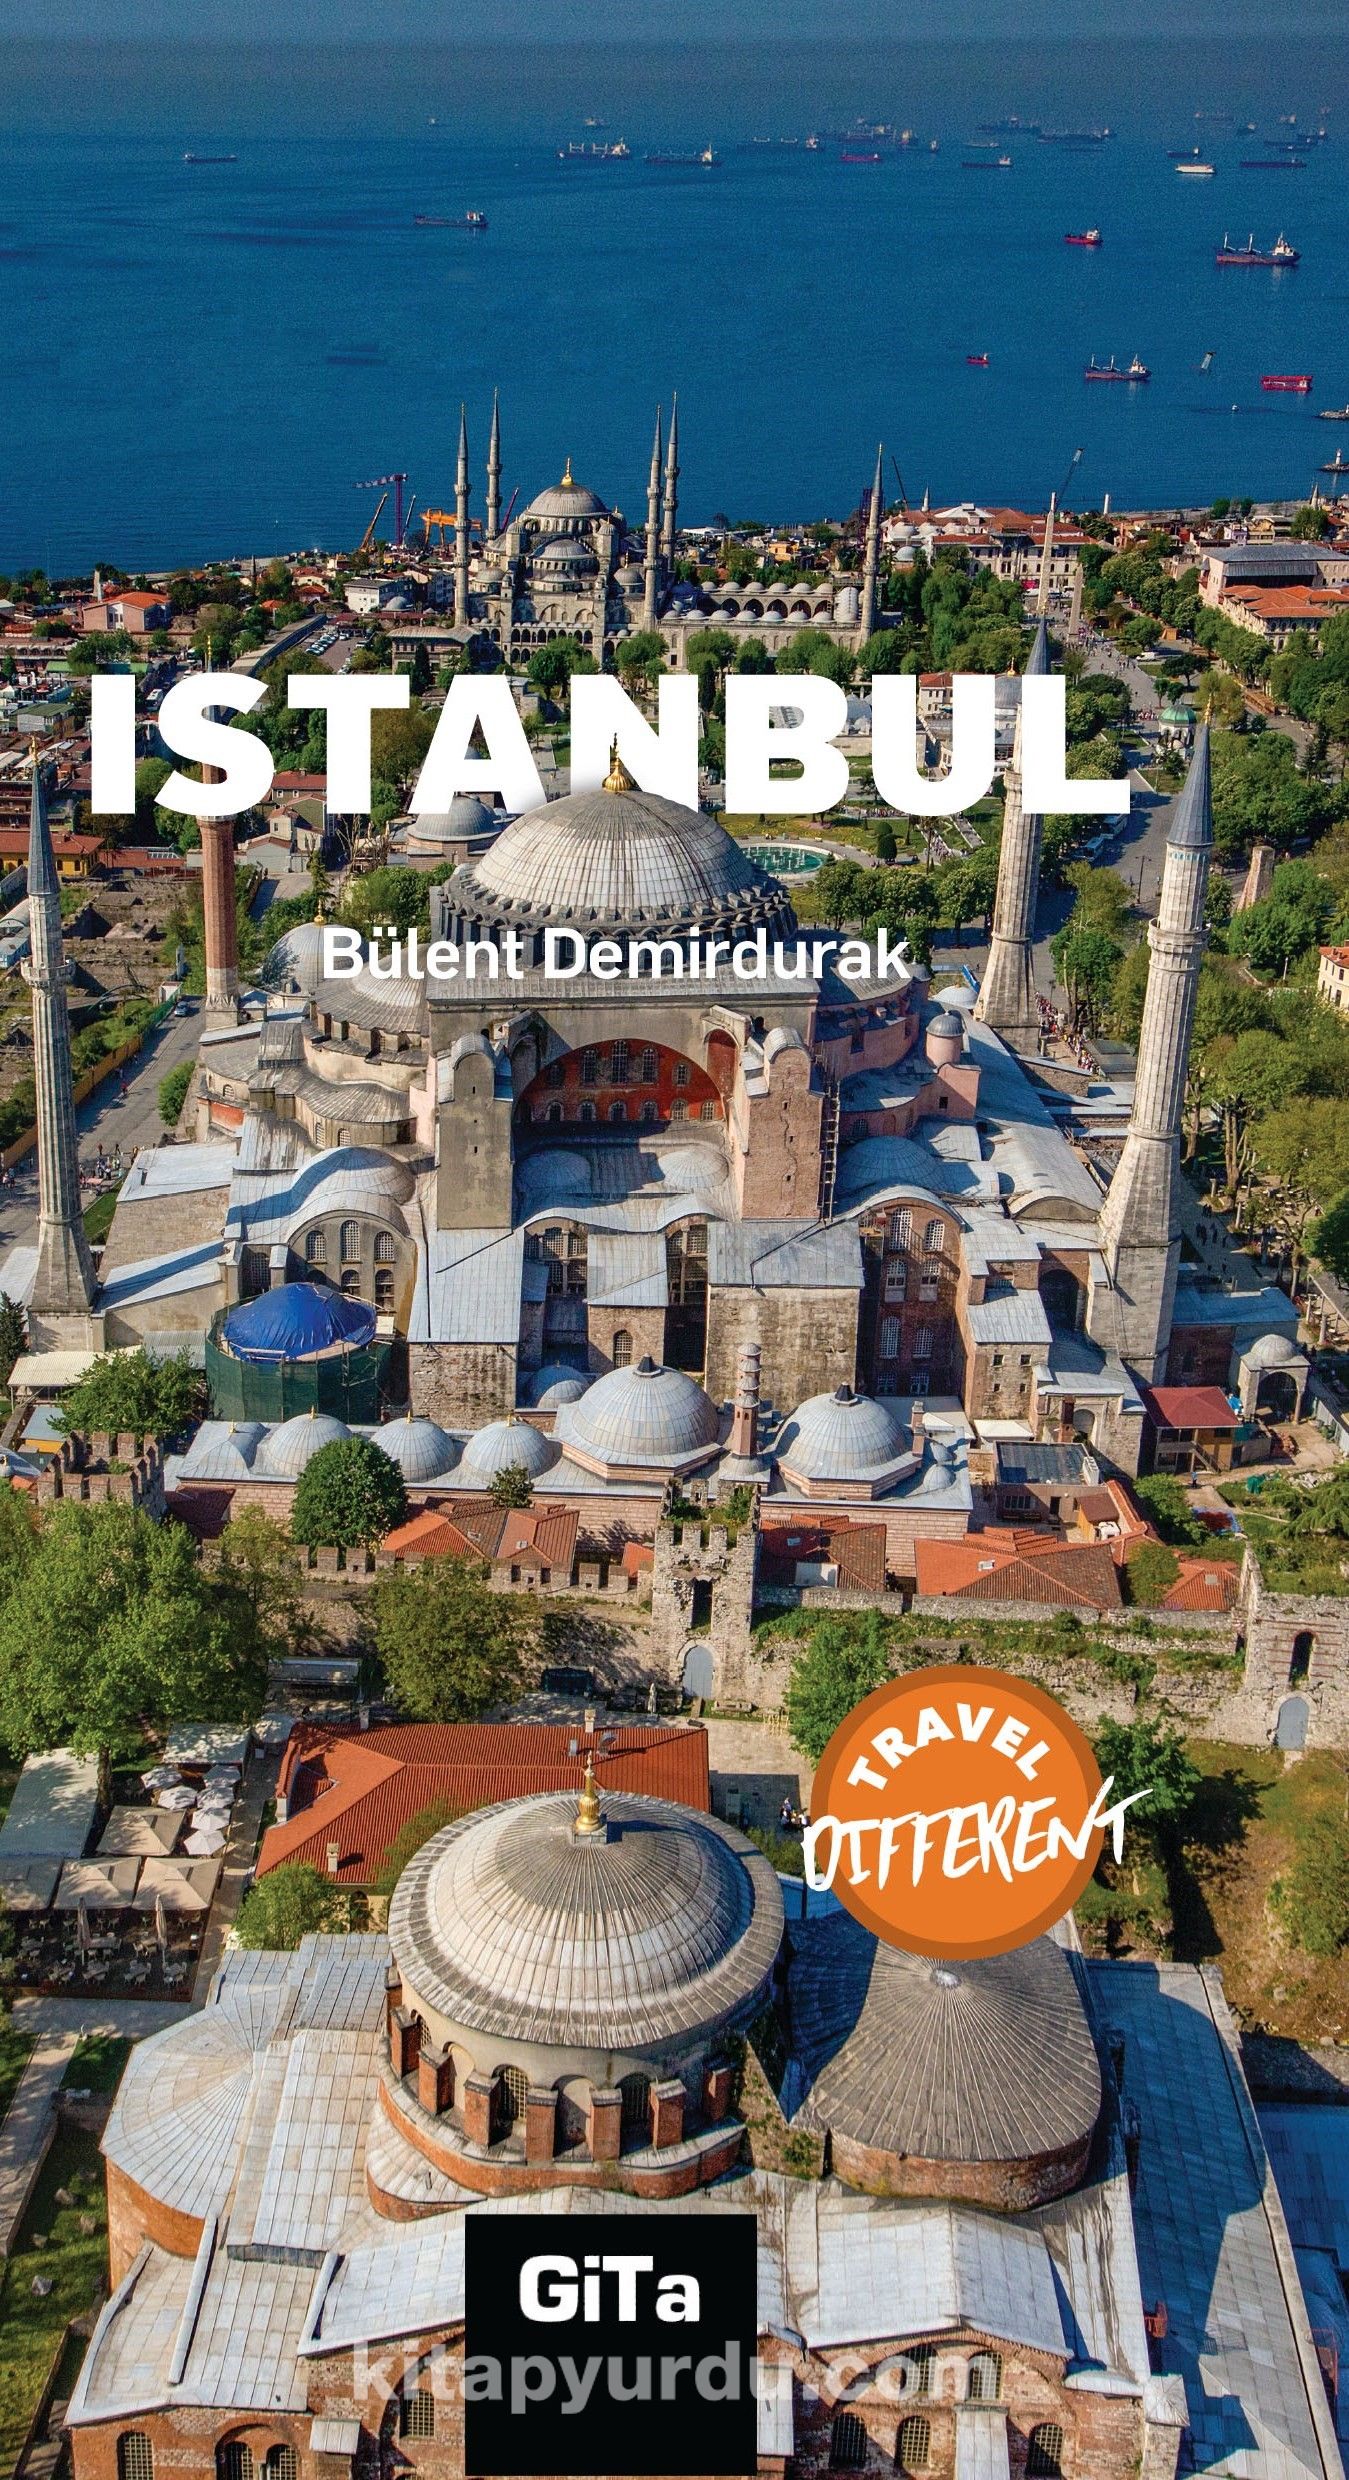 Istanbul & Travel Different